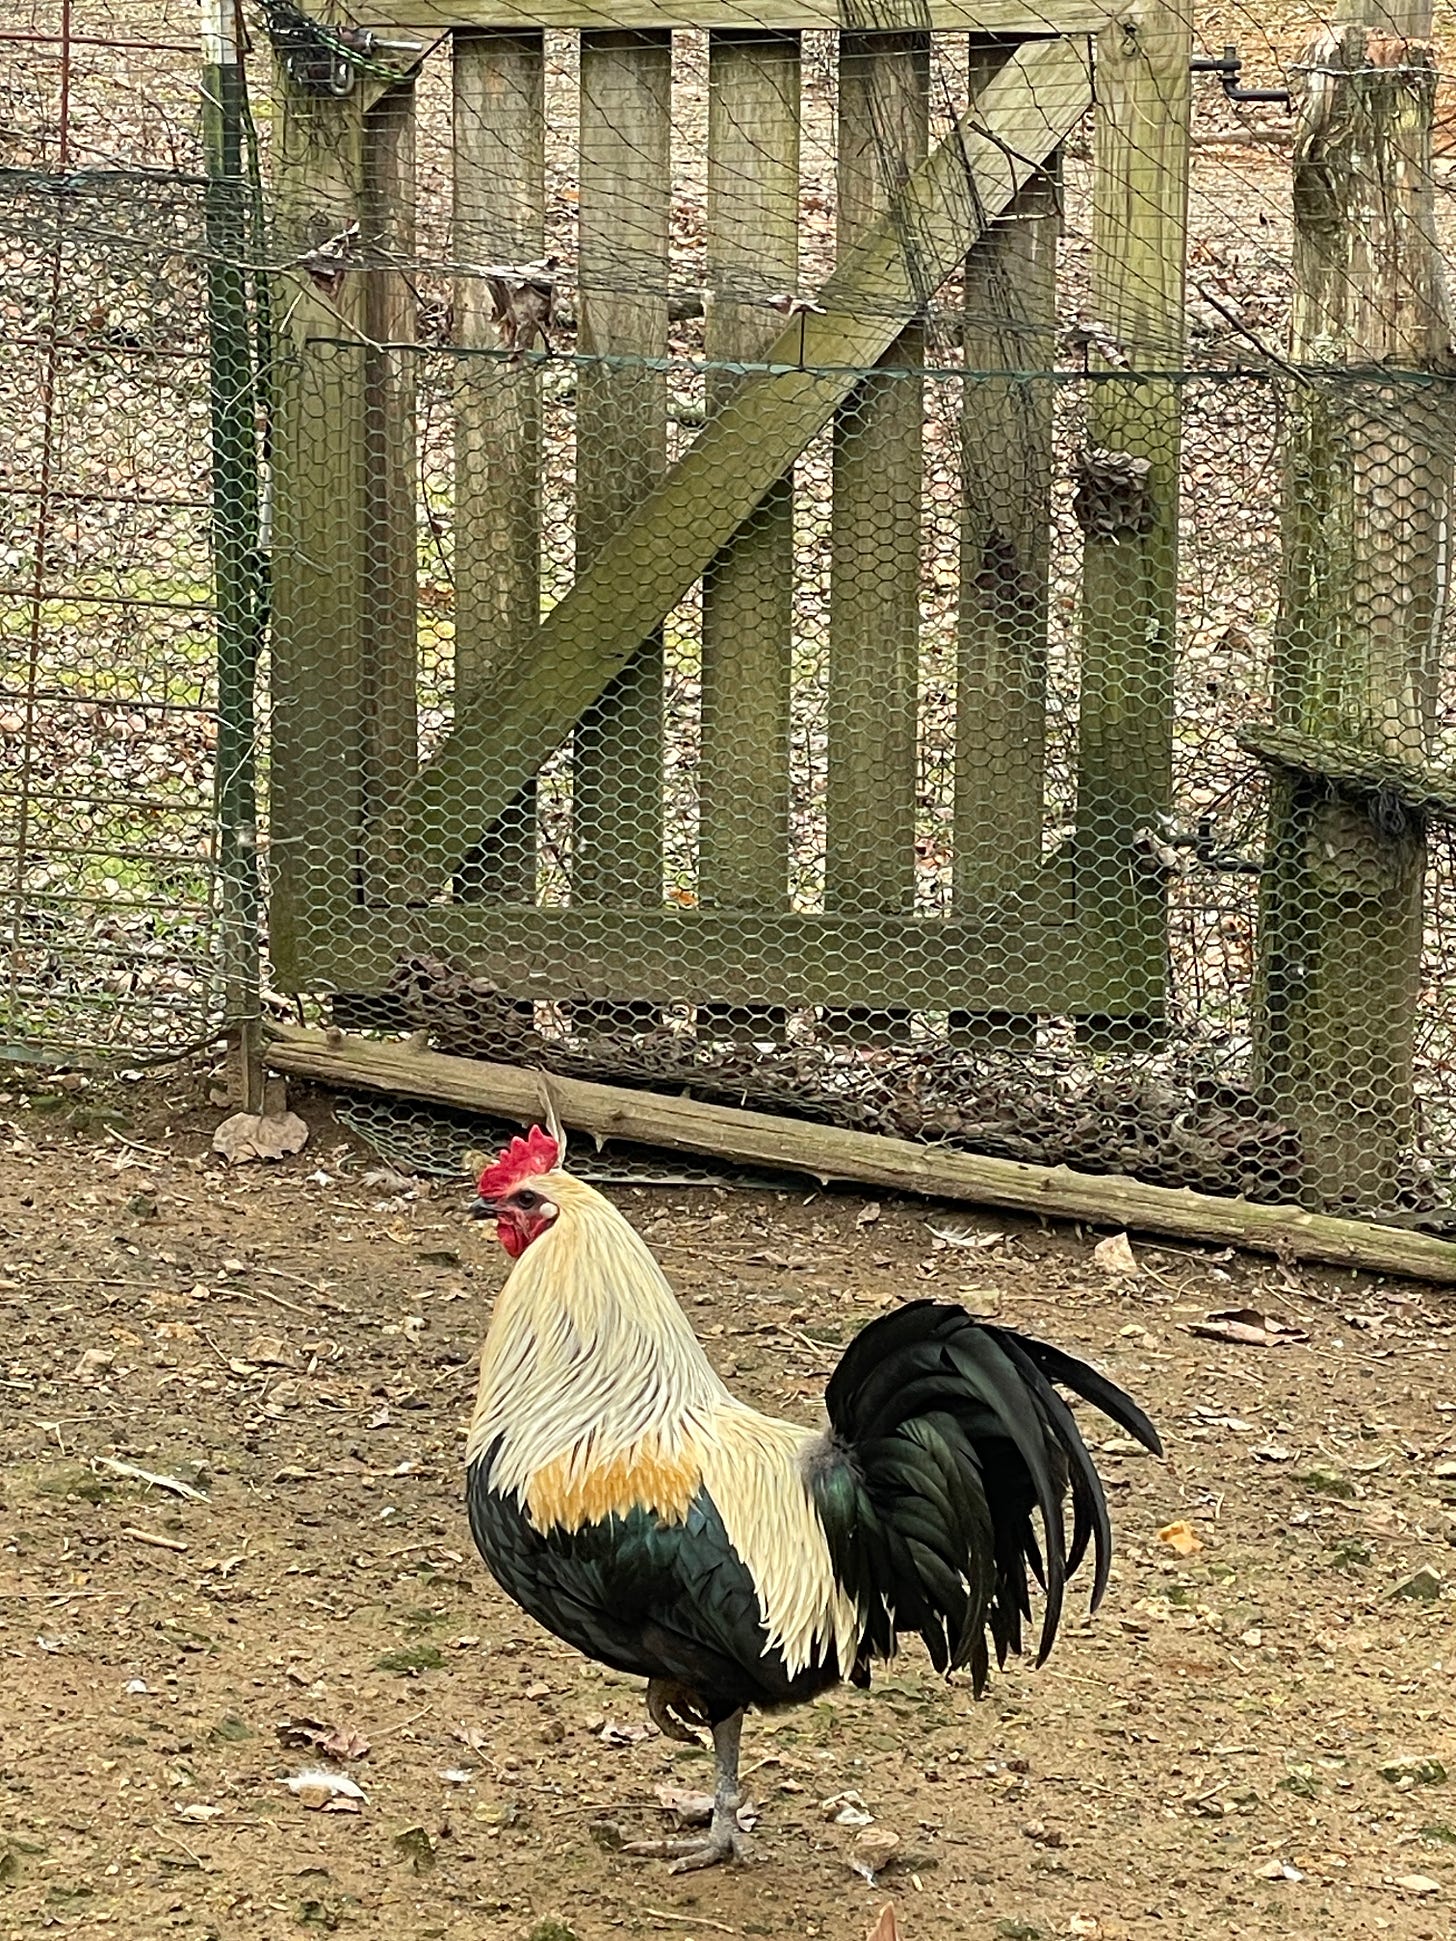 A glorious, majestic looking rooster 